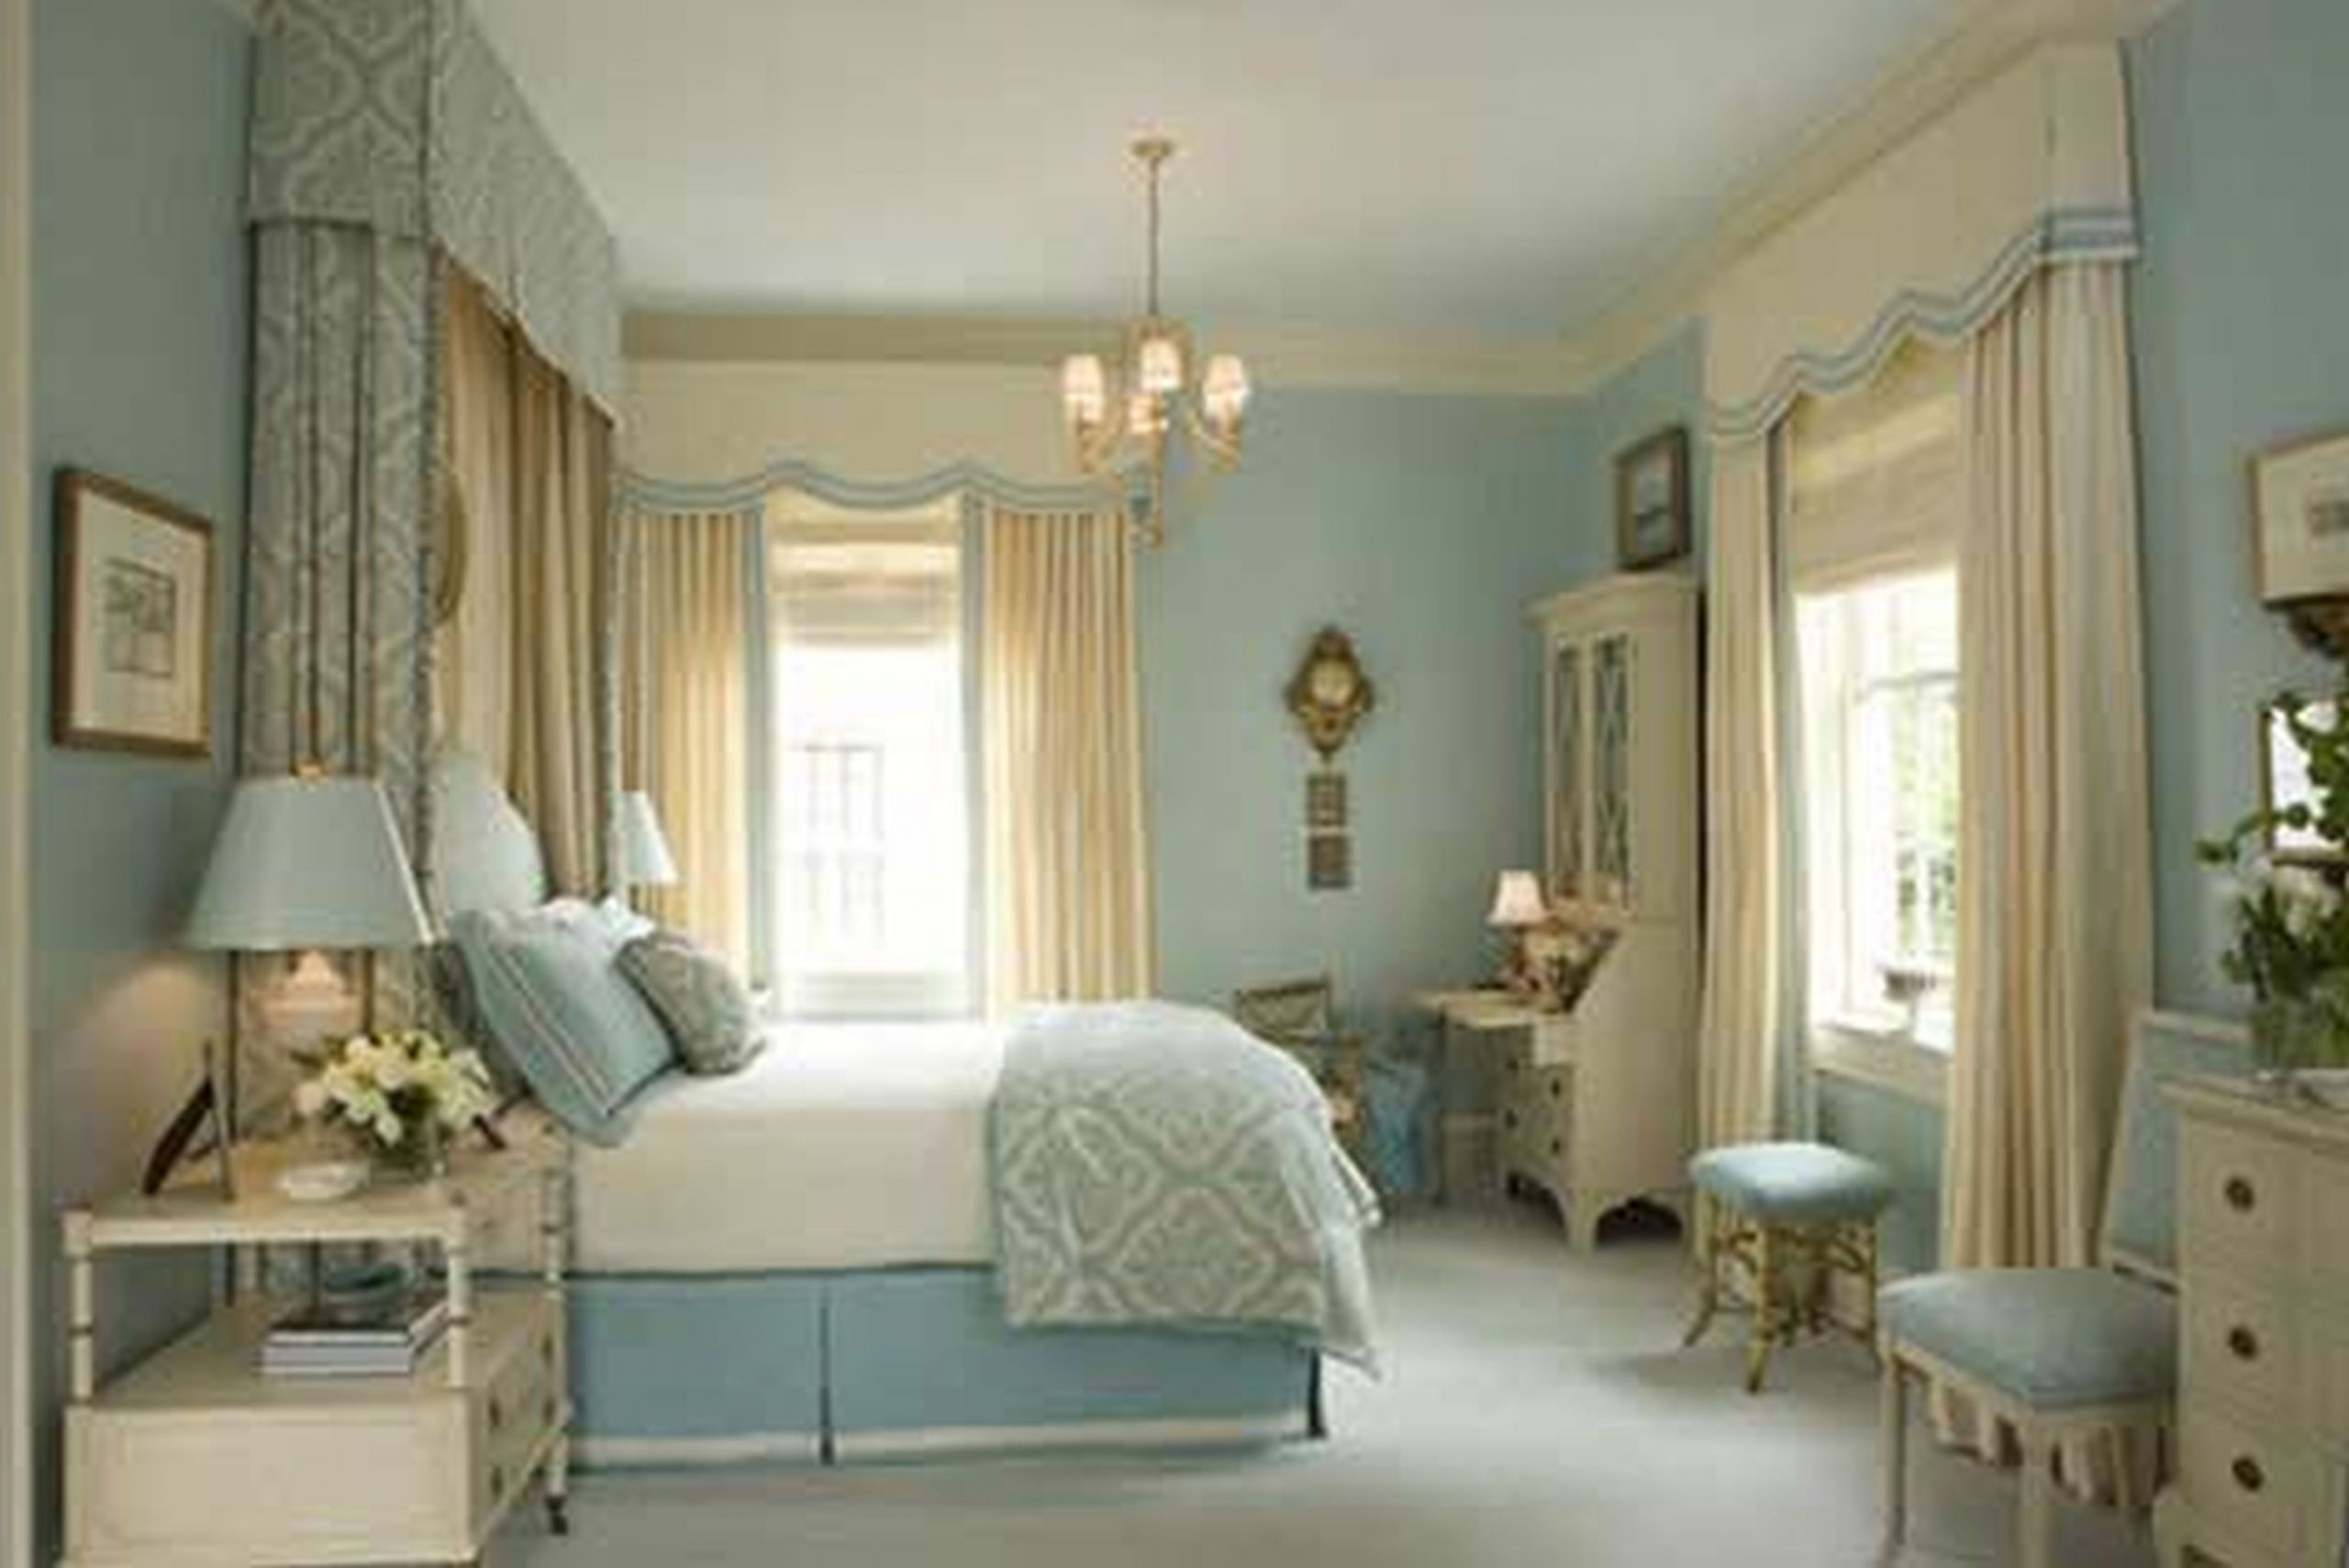 Cool Paint Colors For Bedrooms
 3 Essential Considerations in Choosing Paint Color for